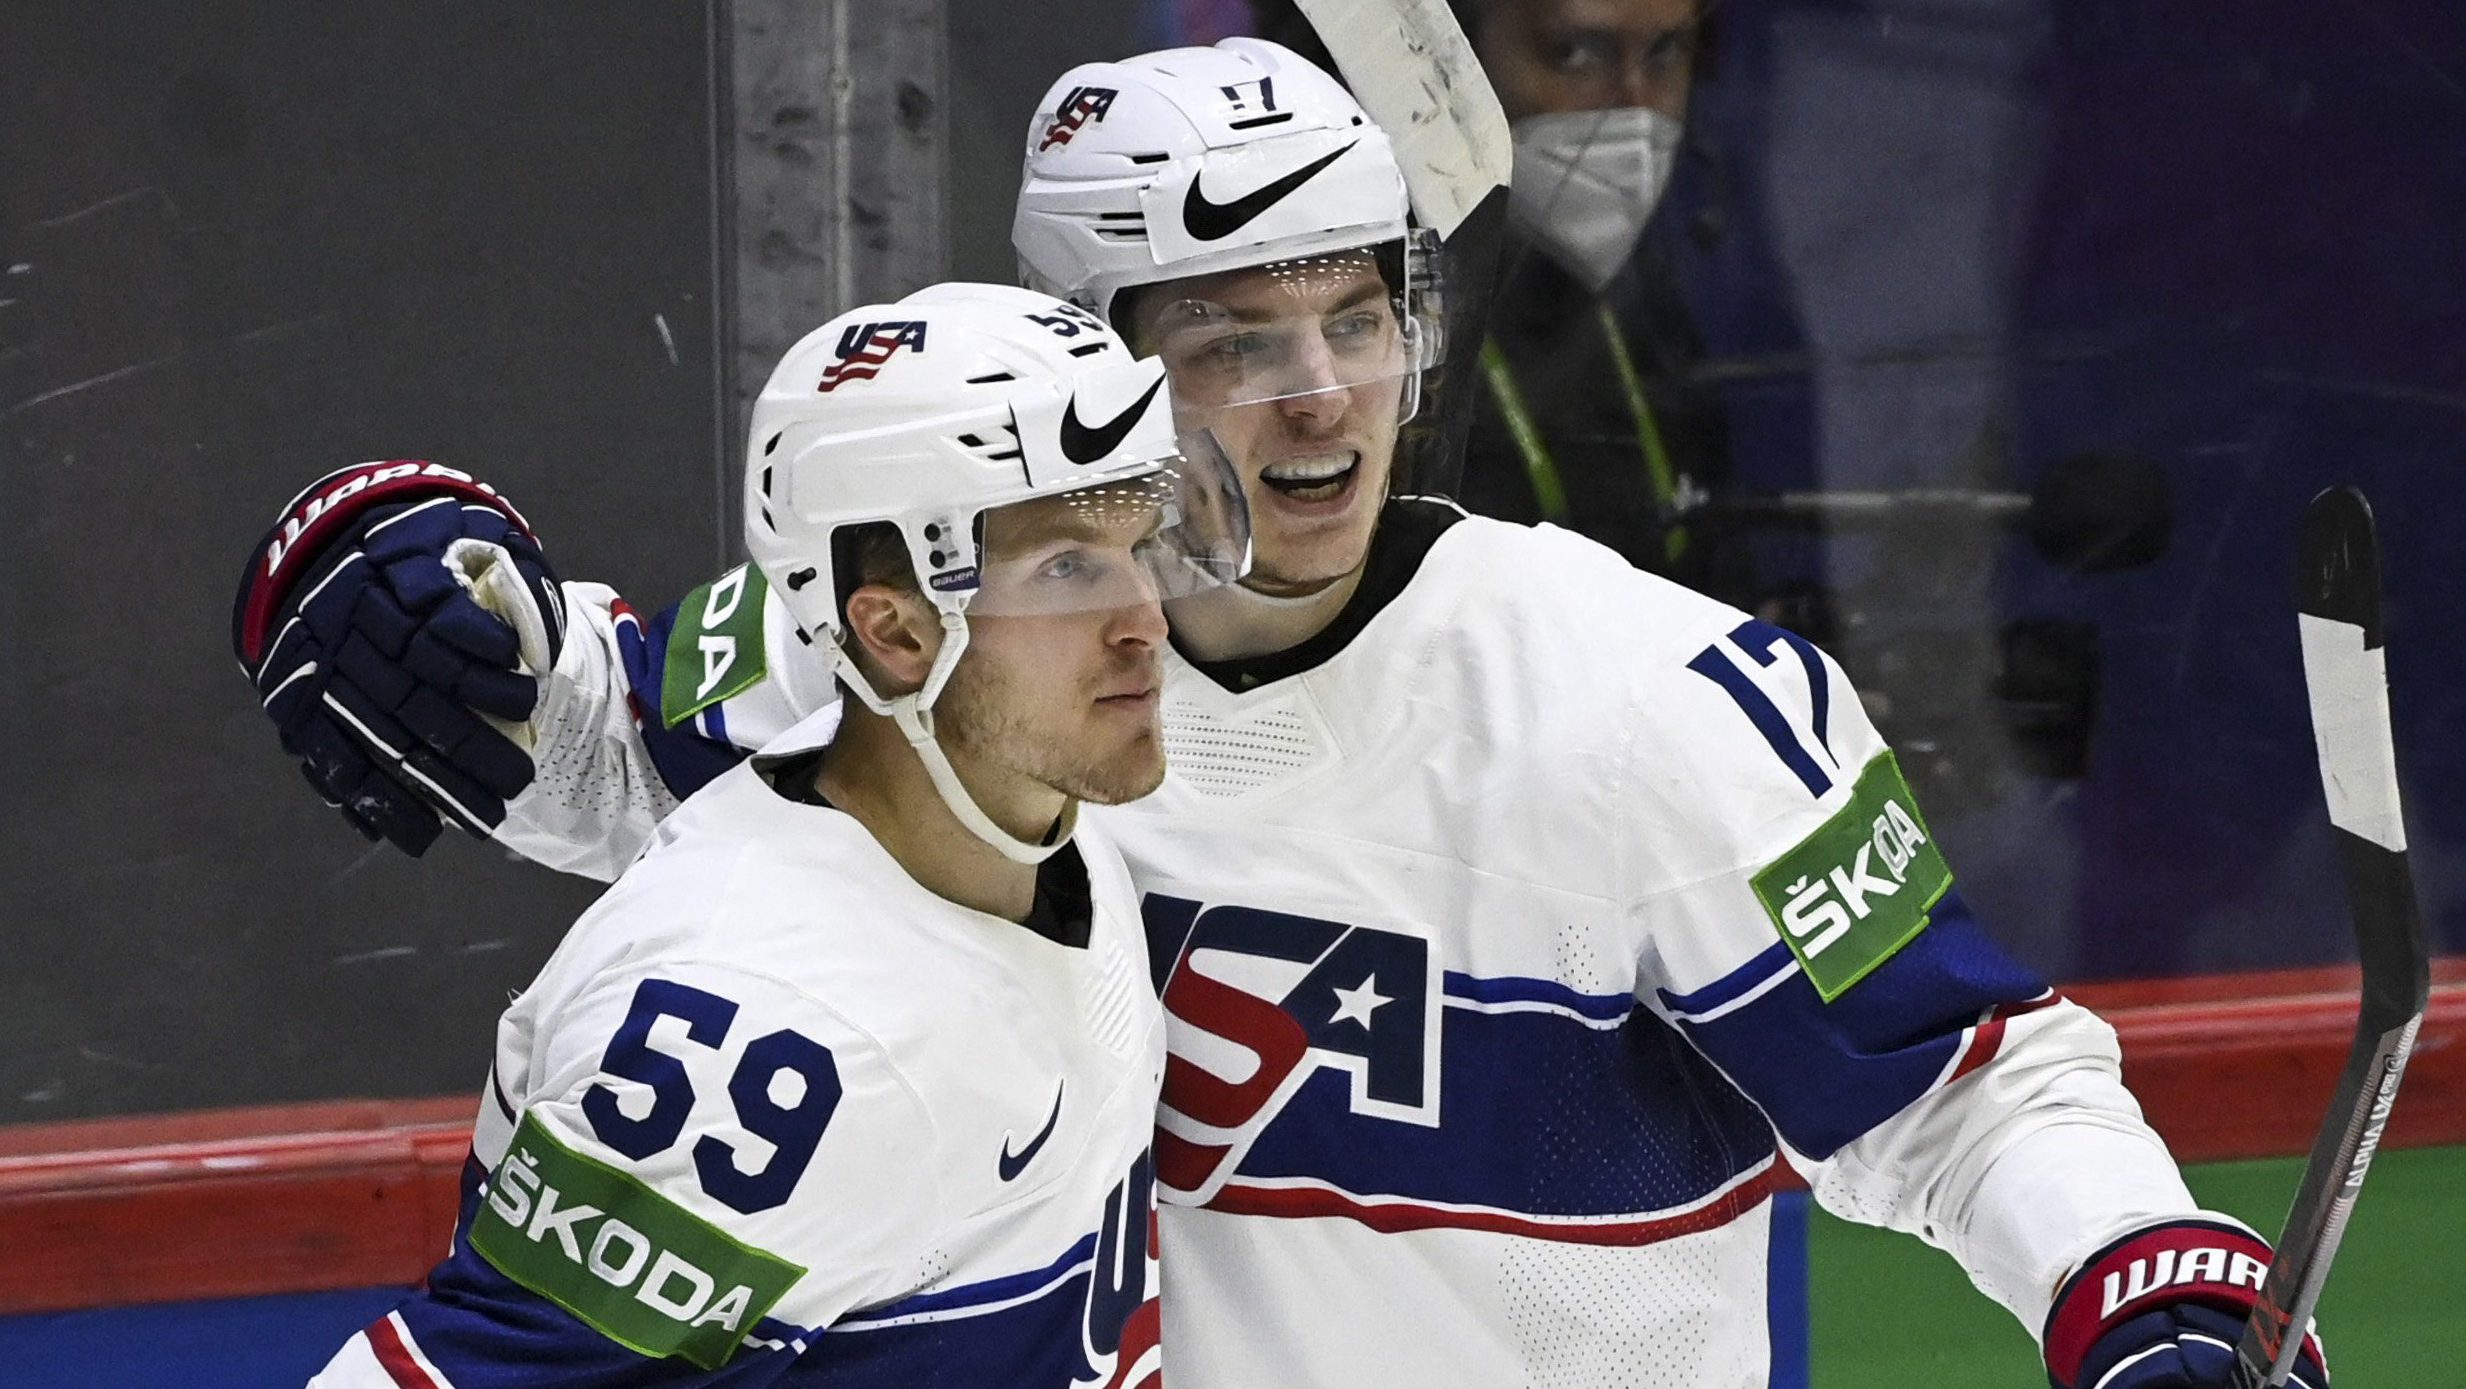 How to Watch USA vs Finland IIHF Semifinal Live Online Heavy